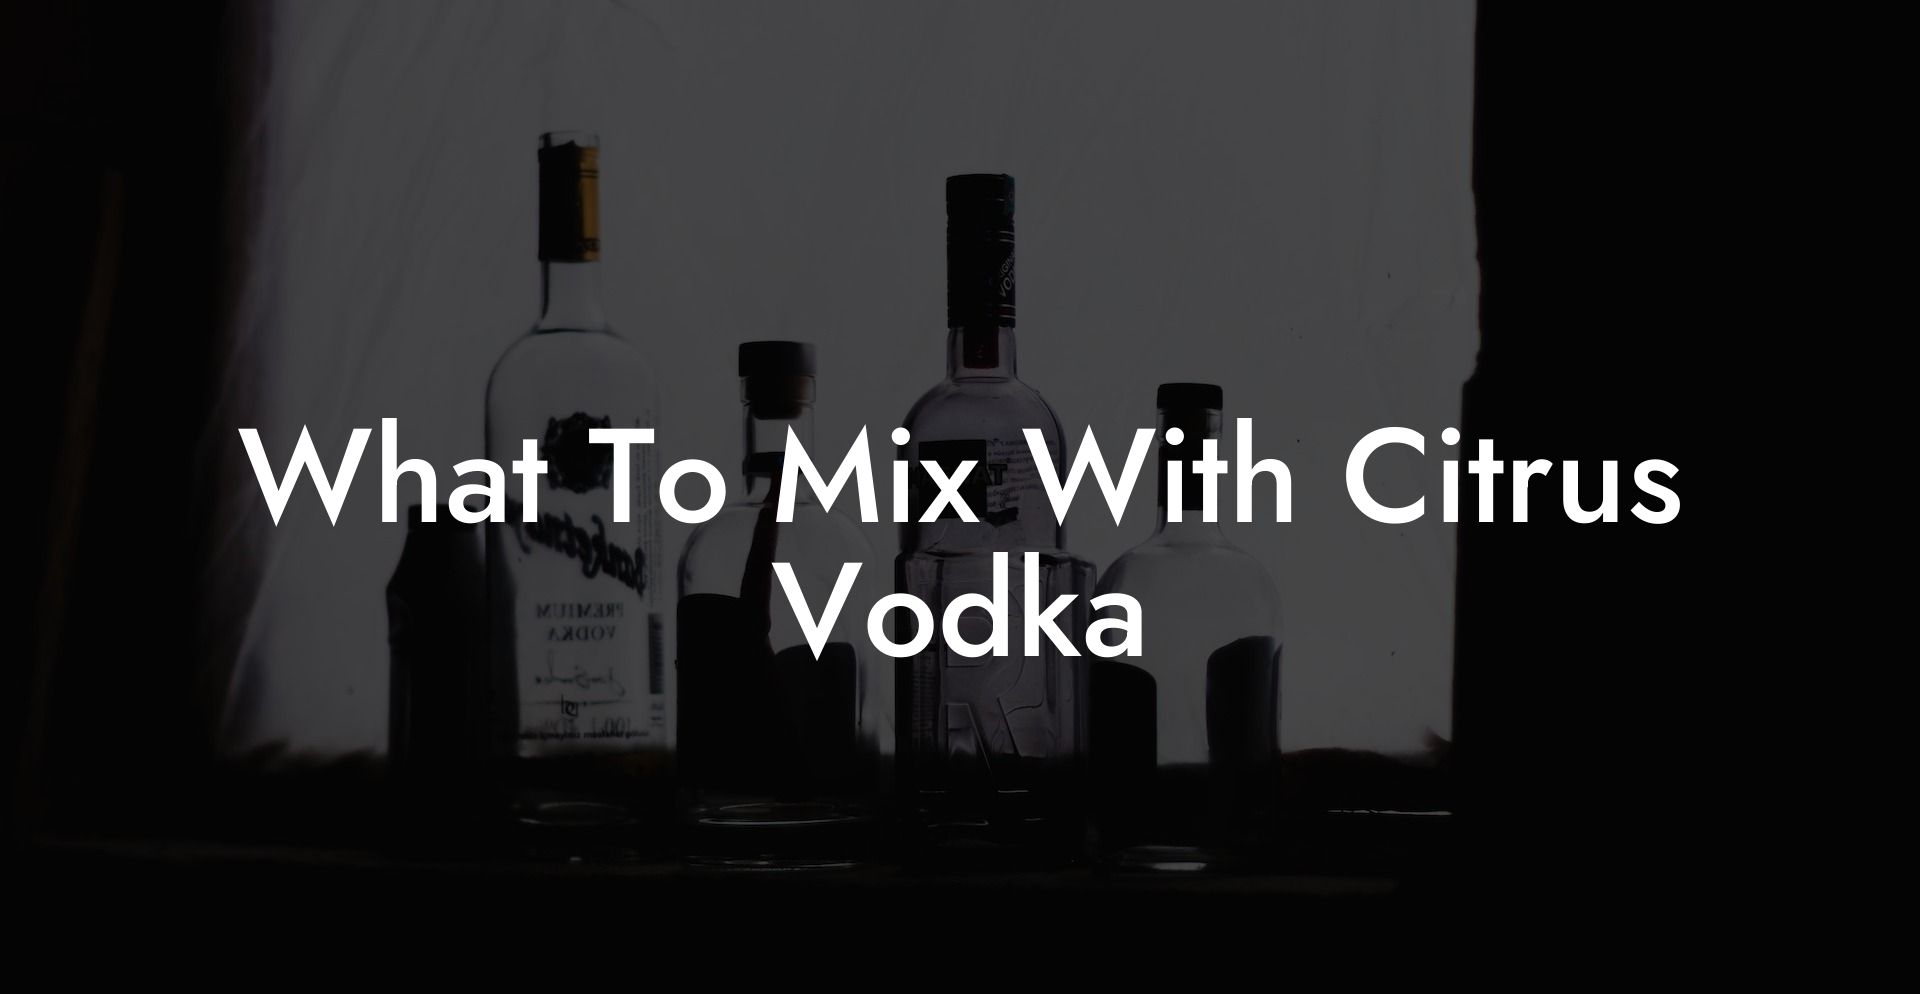 What To Mix With Citrus Vodka